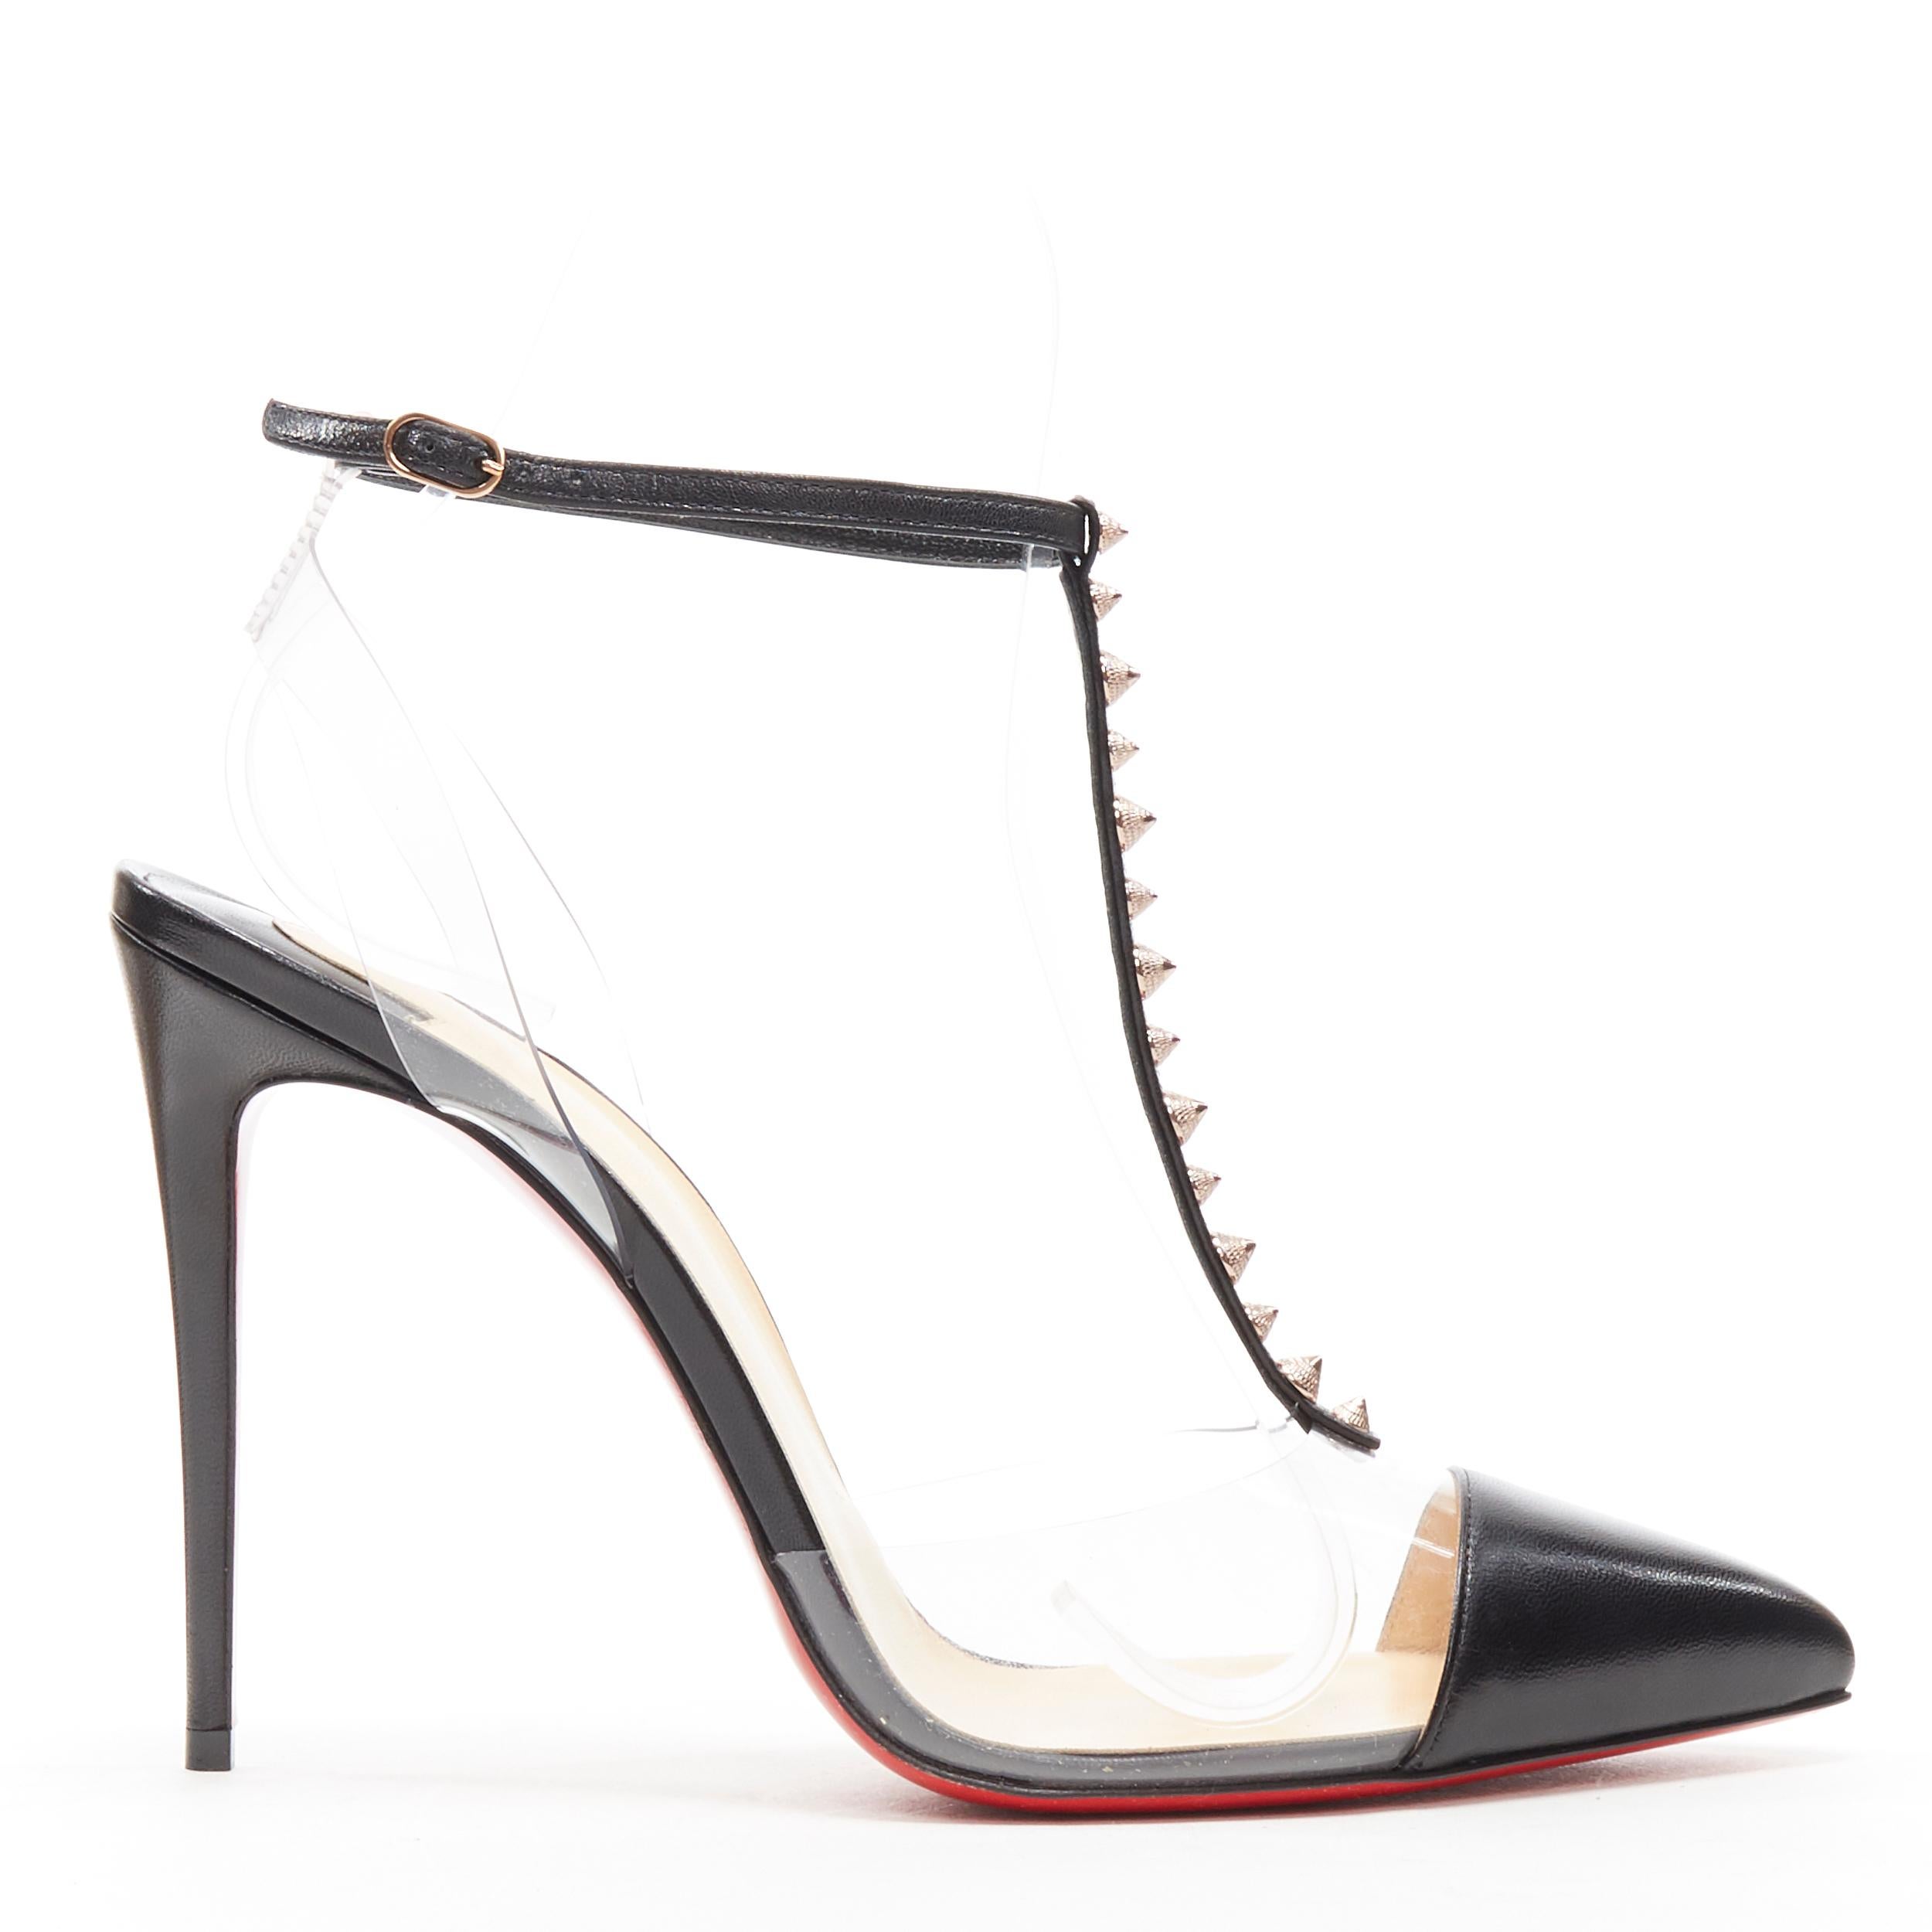 new CHRISTIAN LOUBOUTIN Nosy Spikes 100 black spike PVC T-strap pumps 39.5
Brand: Christian Louboutin
Designer: Christian Louboutin
Model Name / Style: Nosy Spikes 100
Material: PVC
Color: Black
Pattern: Solid
Closure: Ankle strap
Extra Detail: